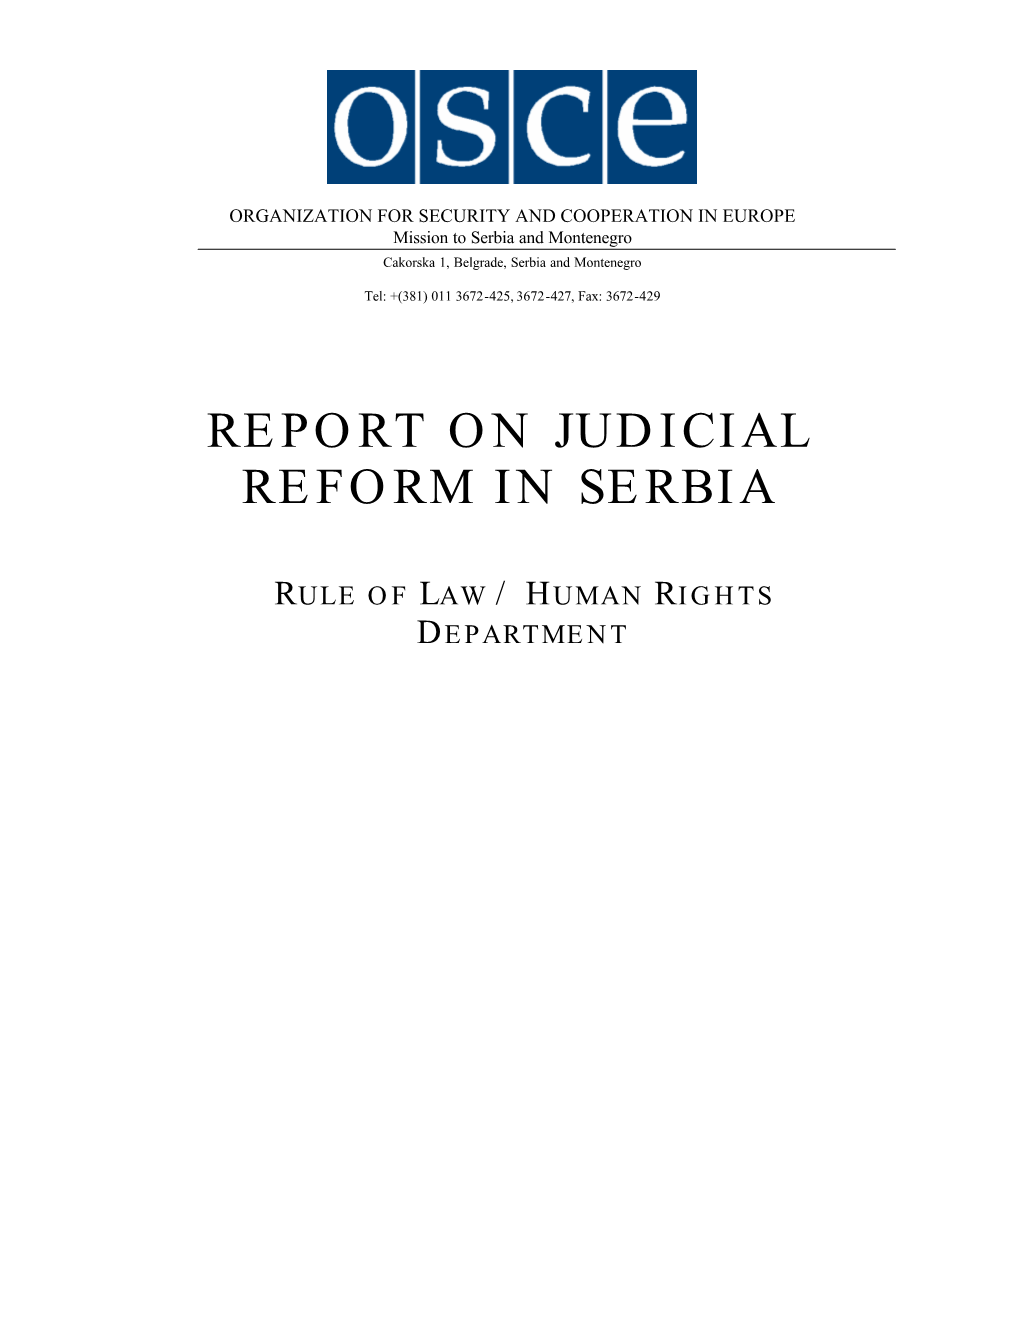 Report on Judicial Reform in Serbia-English